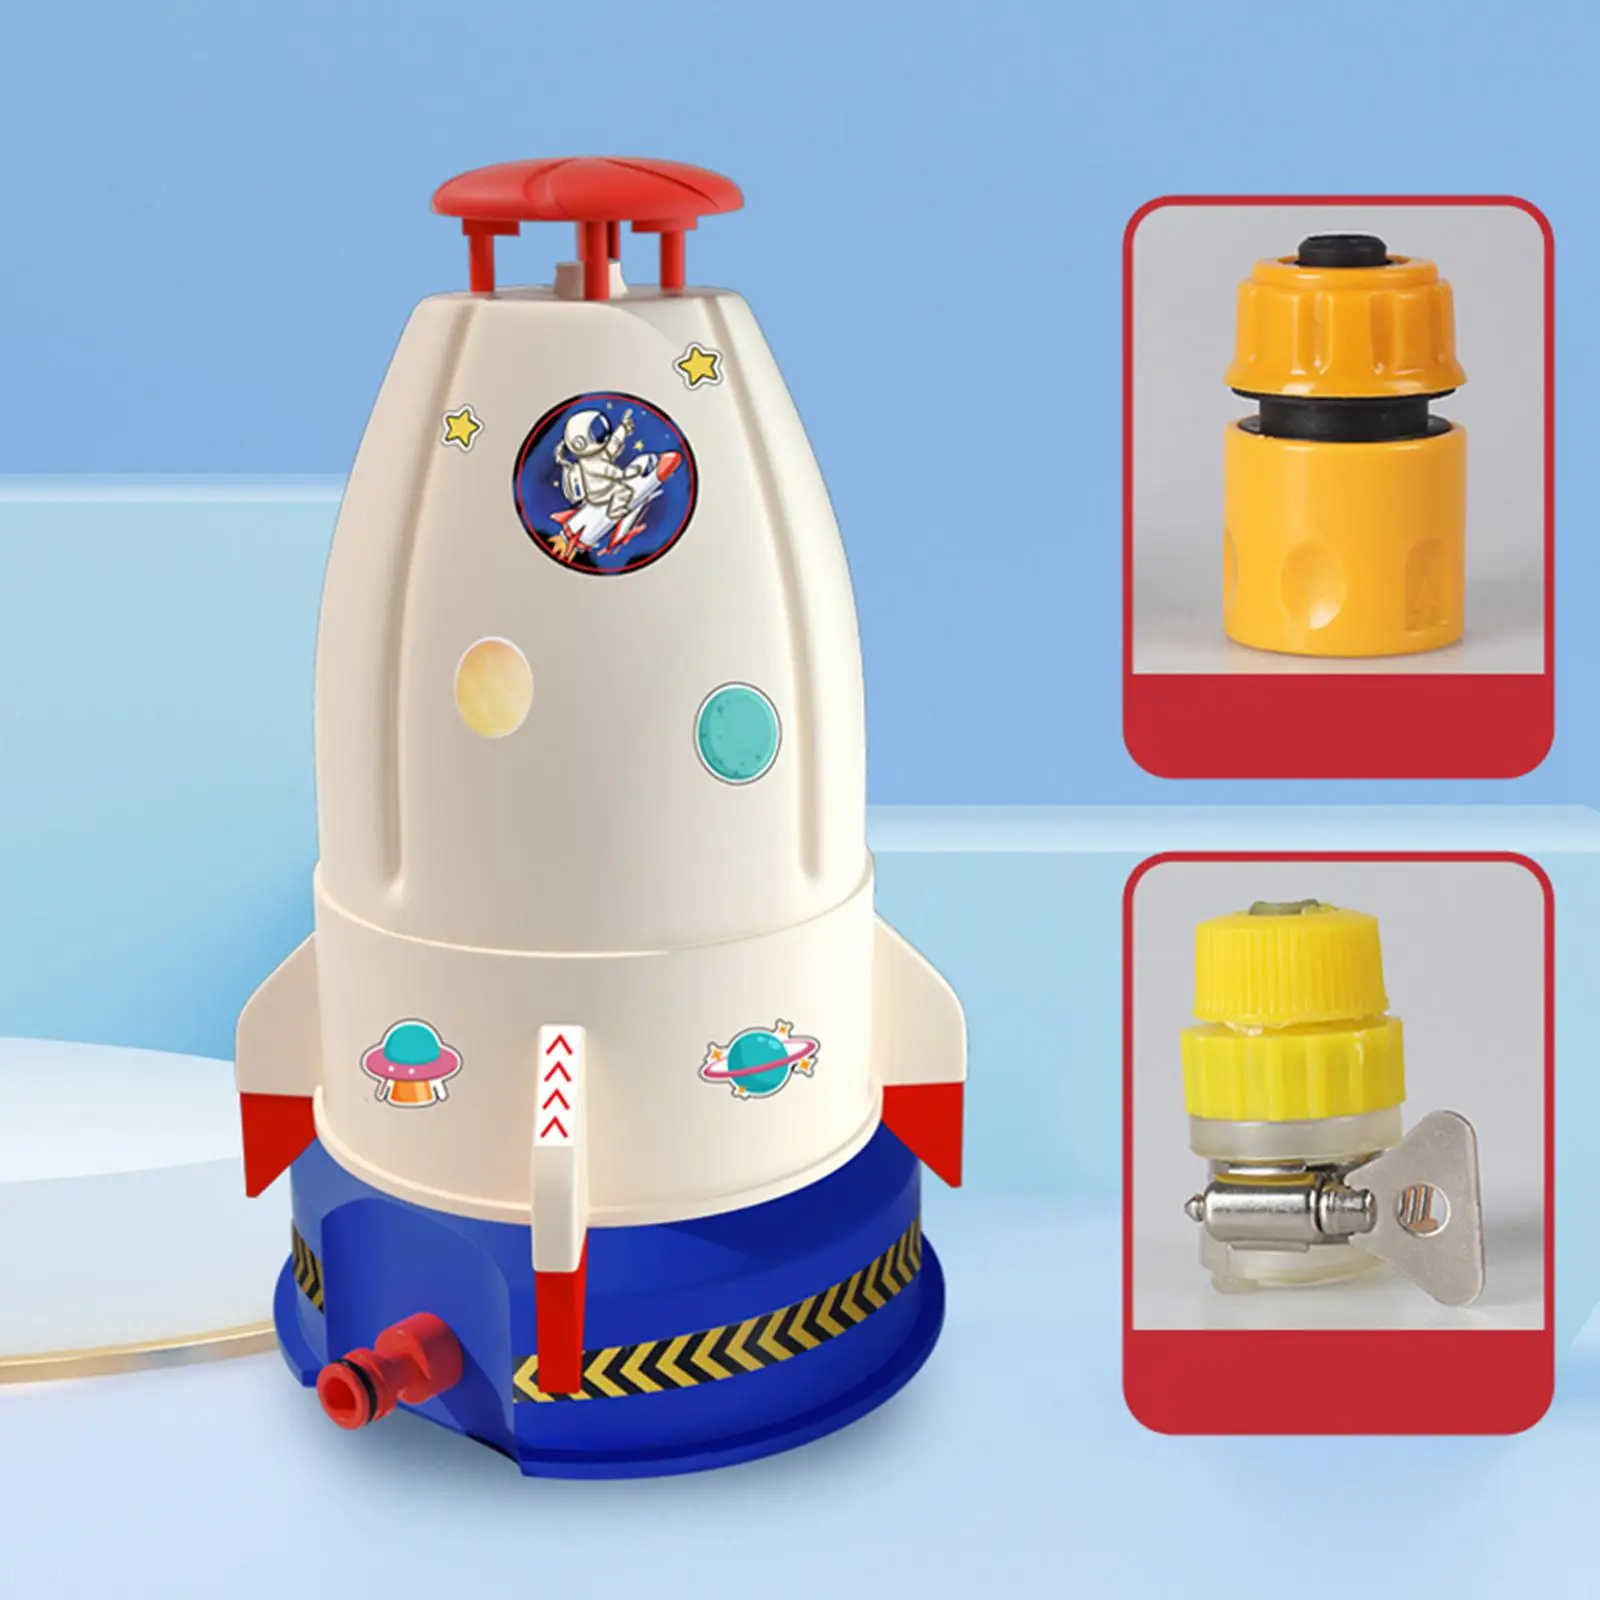 Rocket Water Toys Reach to 2meter Altitudes Summer Water Sprayer Toy for Holiday